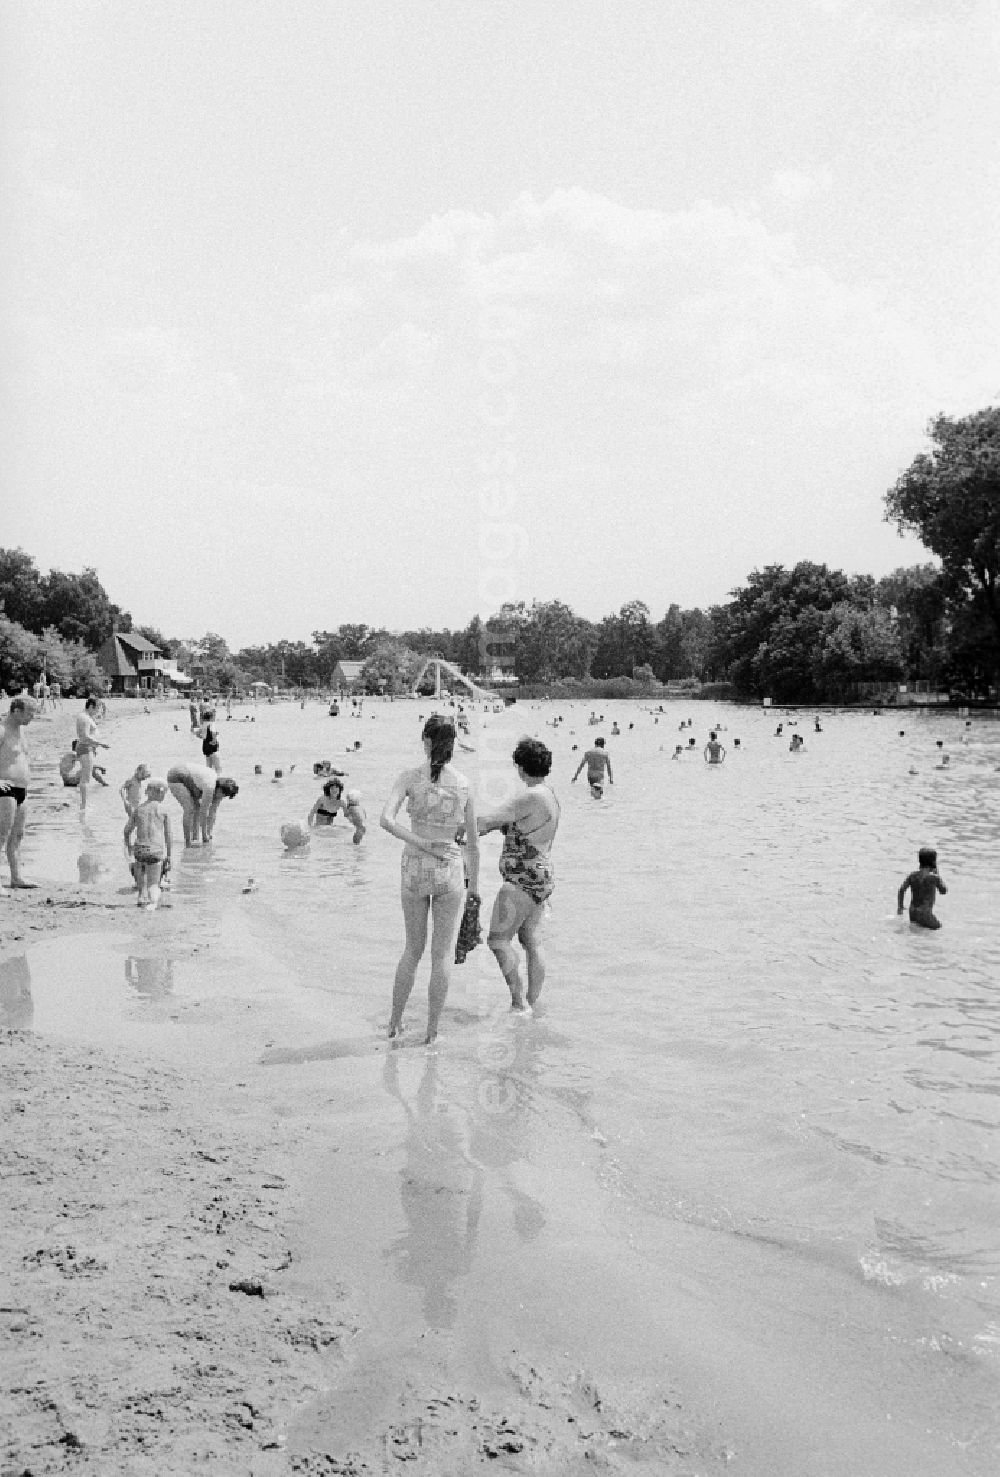 GDR image archive: Berlin - Fez-bath lake on the area of the children and suitable for young people time centre of Wuhlheide in Berlin, the former capital of the GDR, German democratic republic